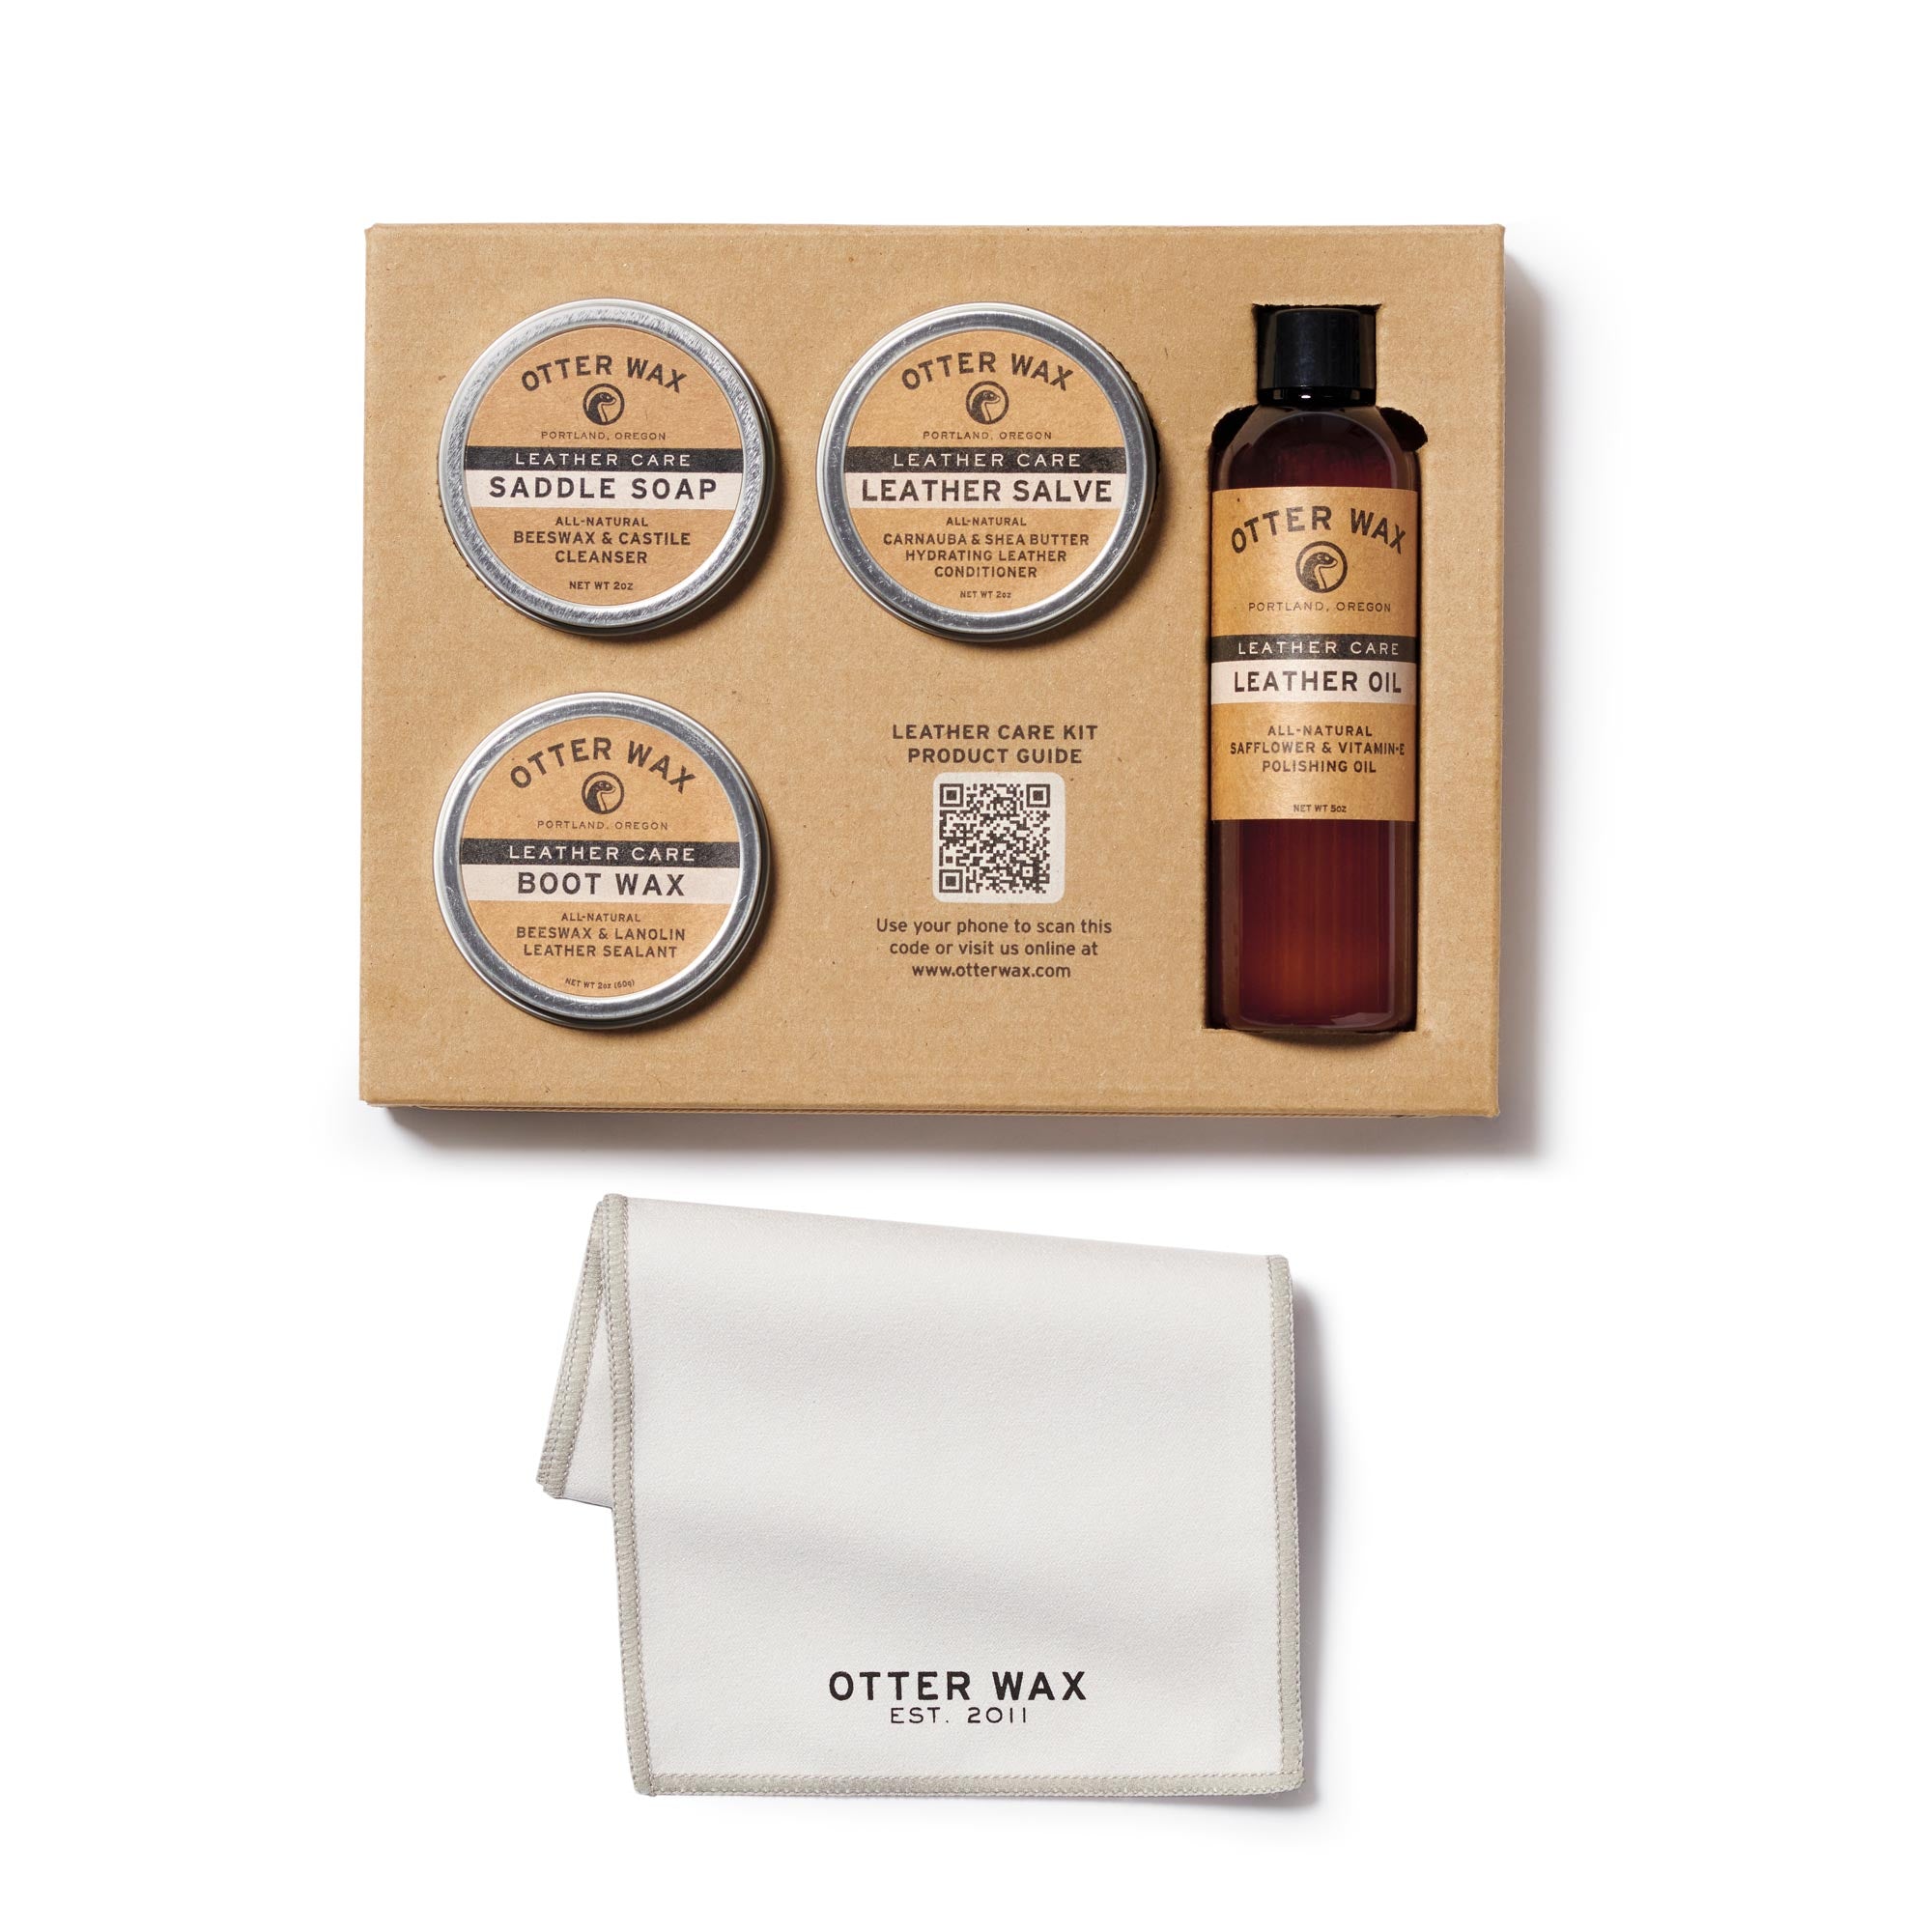 Otter Wax Leather Care Kit | Best Leather Care Products To Condition Clean And Waterproof Leather Boots Jackets Furniture Bags And More